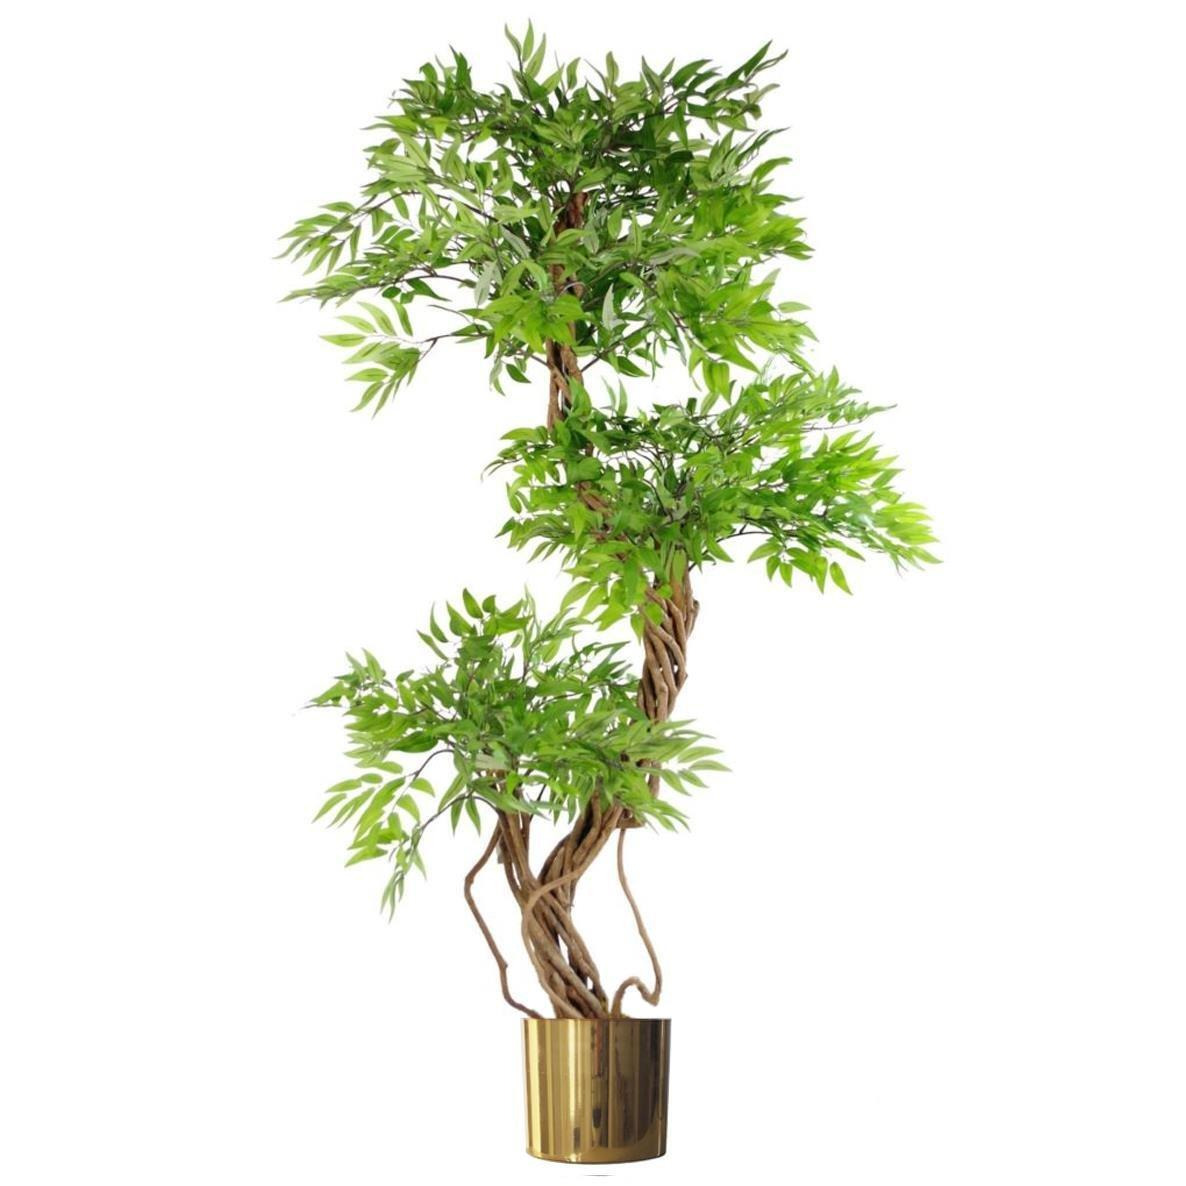 140cm Realistic Artificial Ruscus Fruticosa Tree Ficus Tree Gold Metal Brushed Brass Planter - image 1